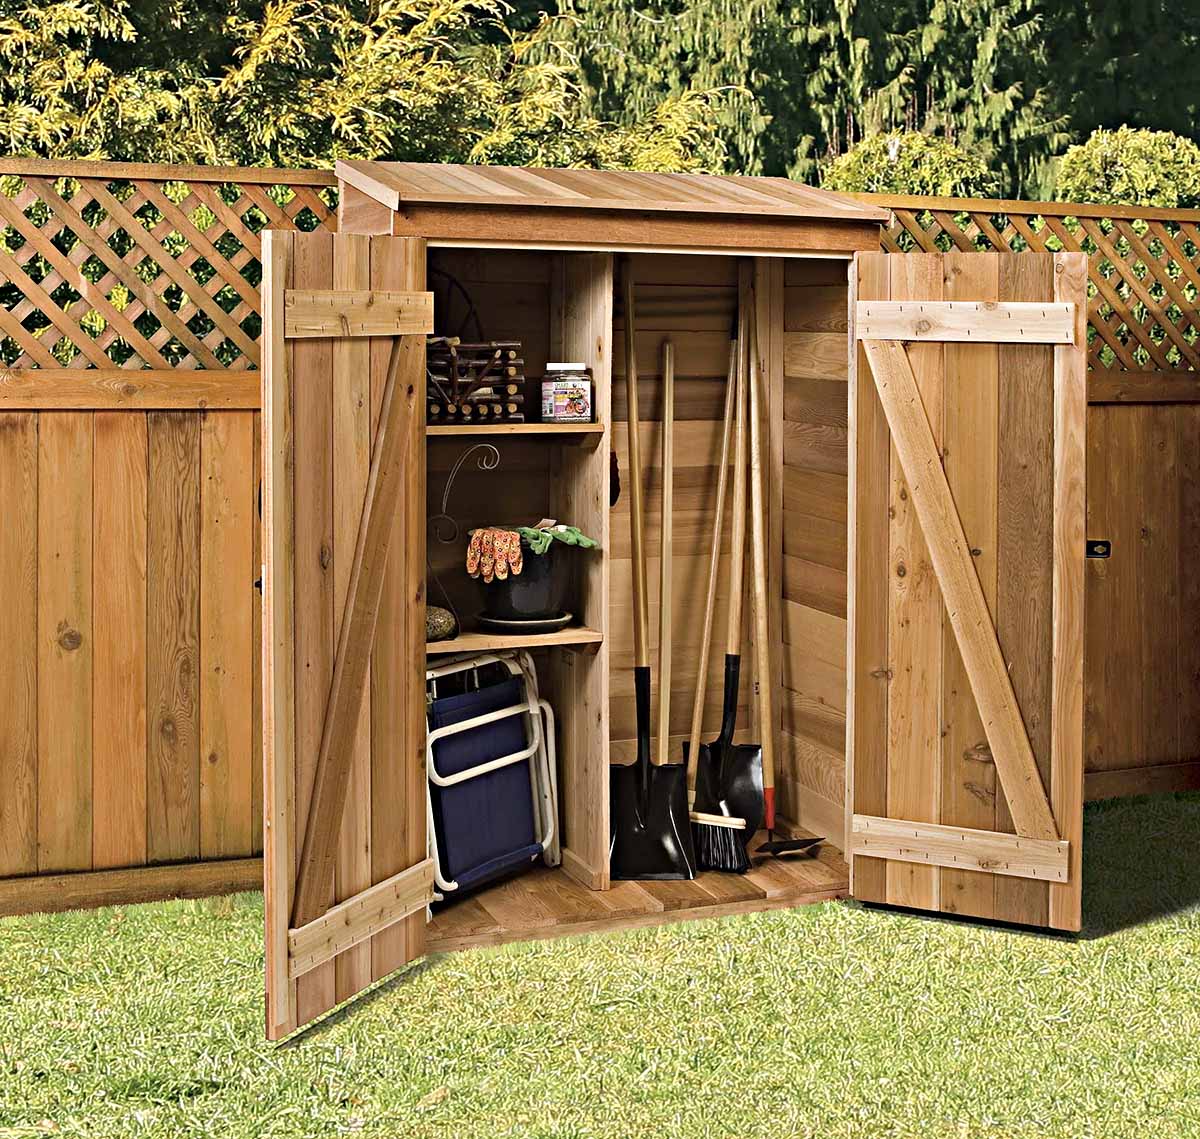 How To Build A Garden Tool Shed